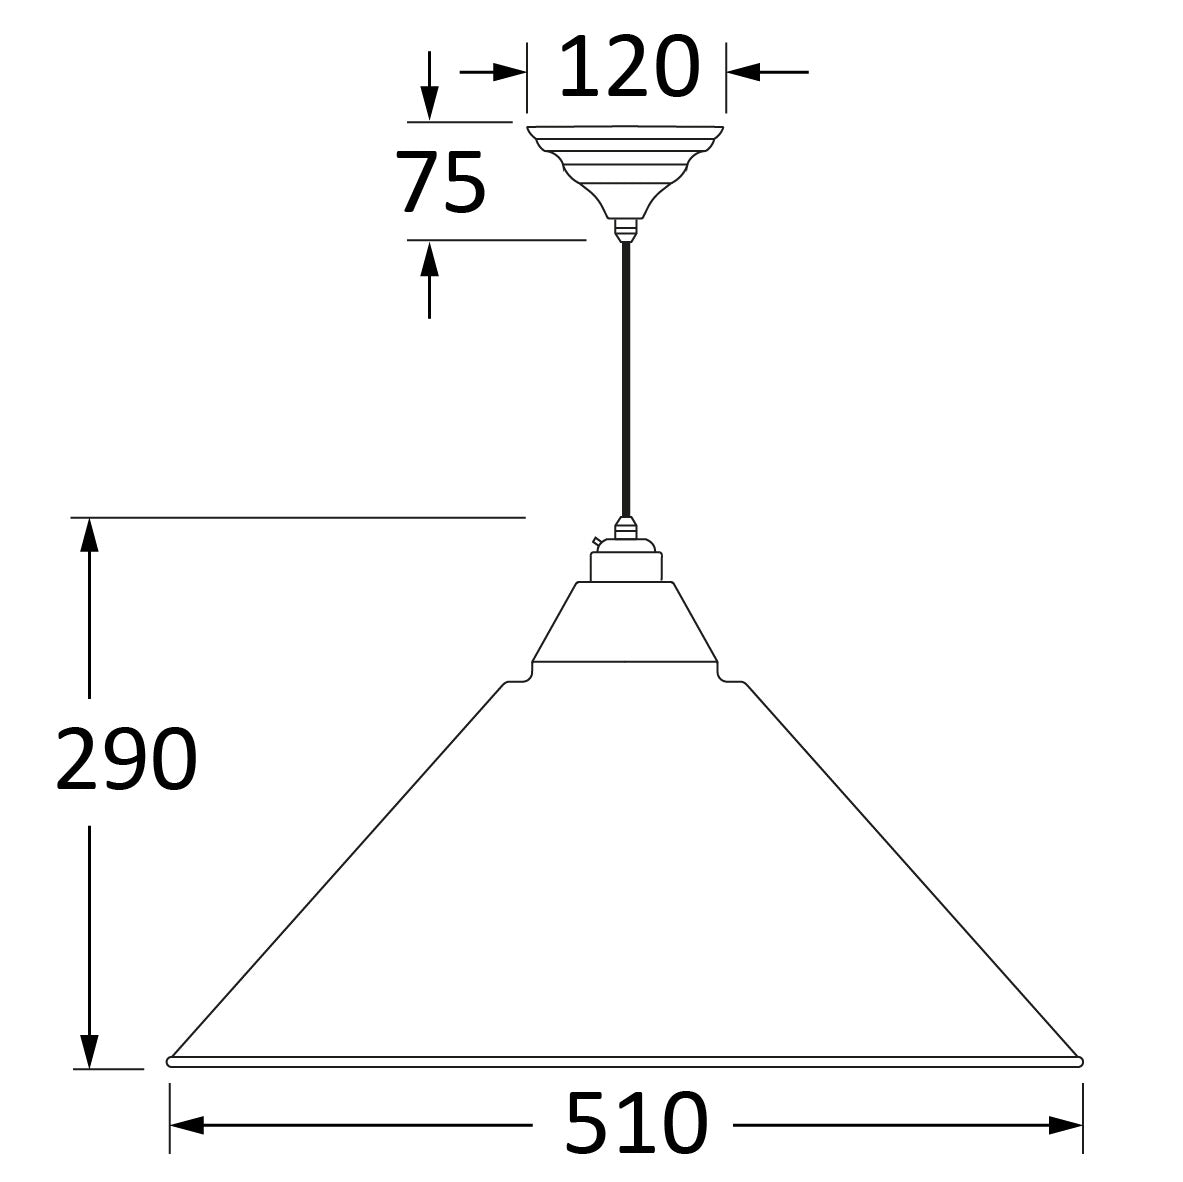 SHOW Technical Drawing of Hockley Ceiling Light in Upstream